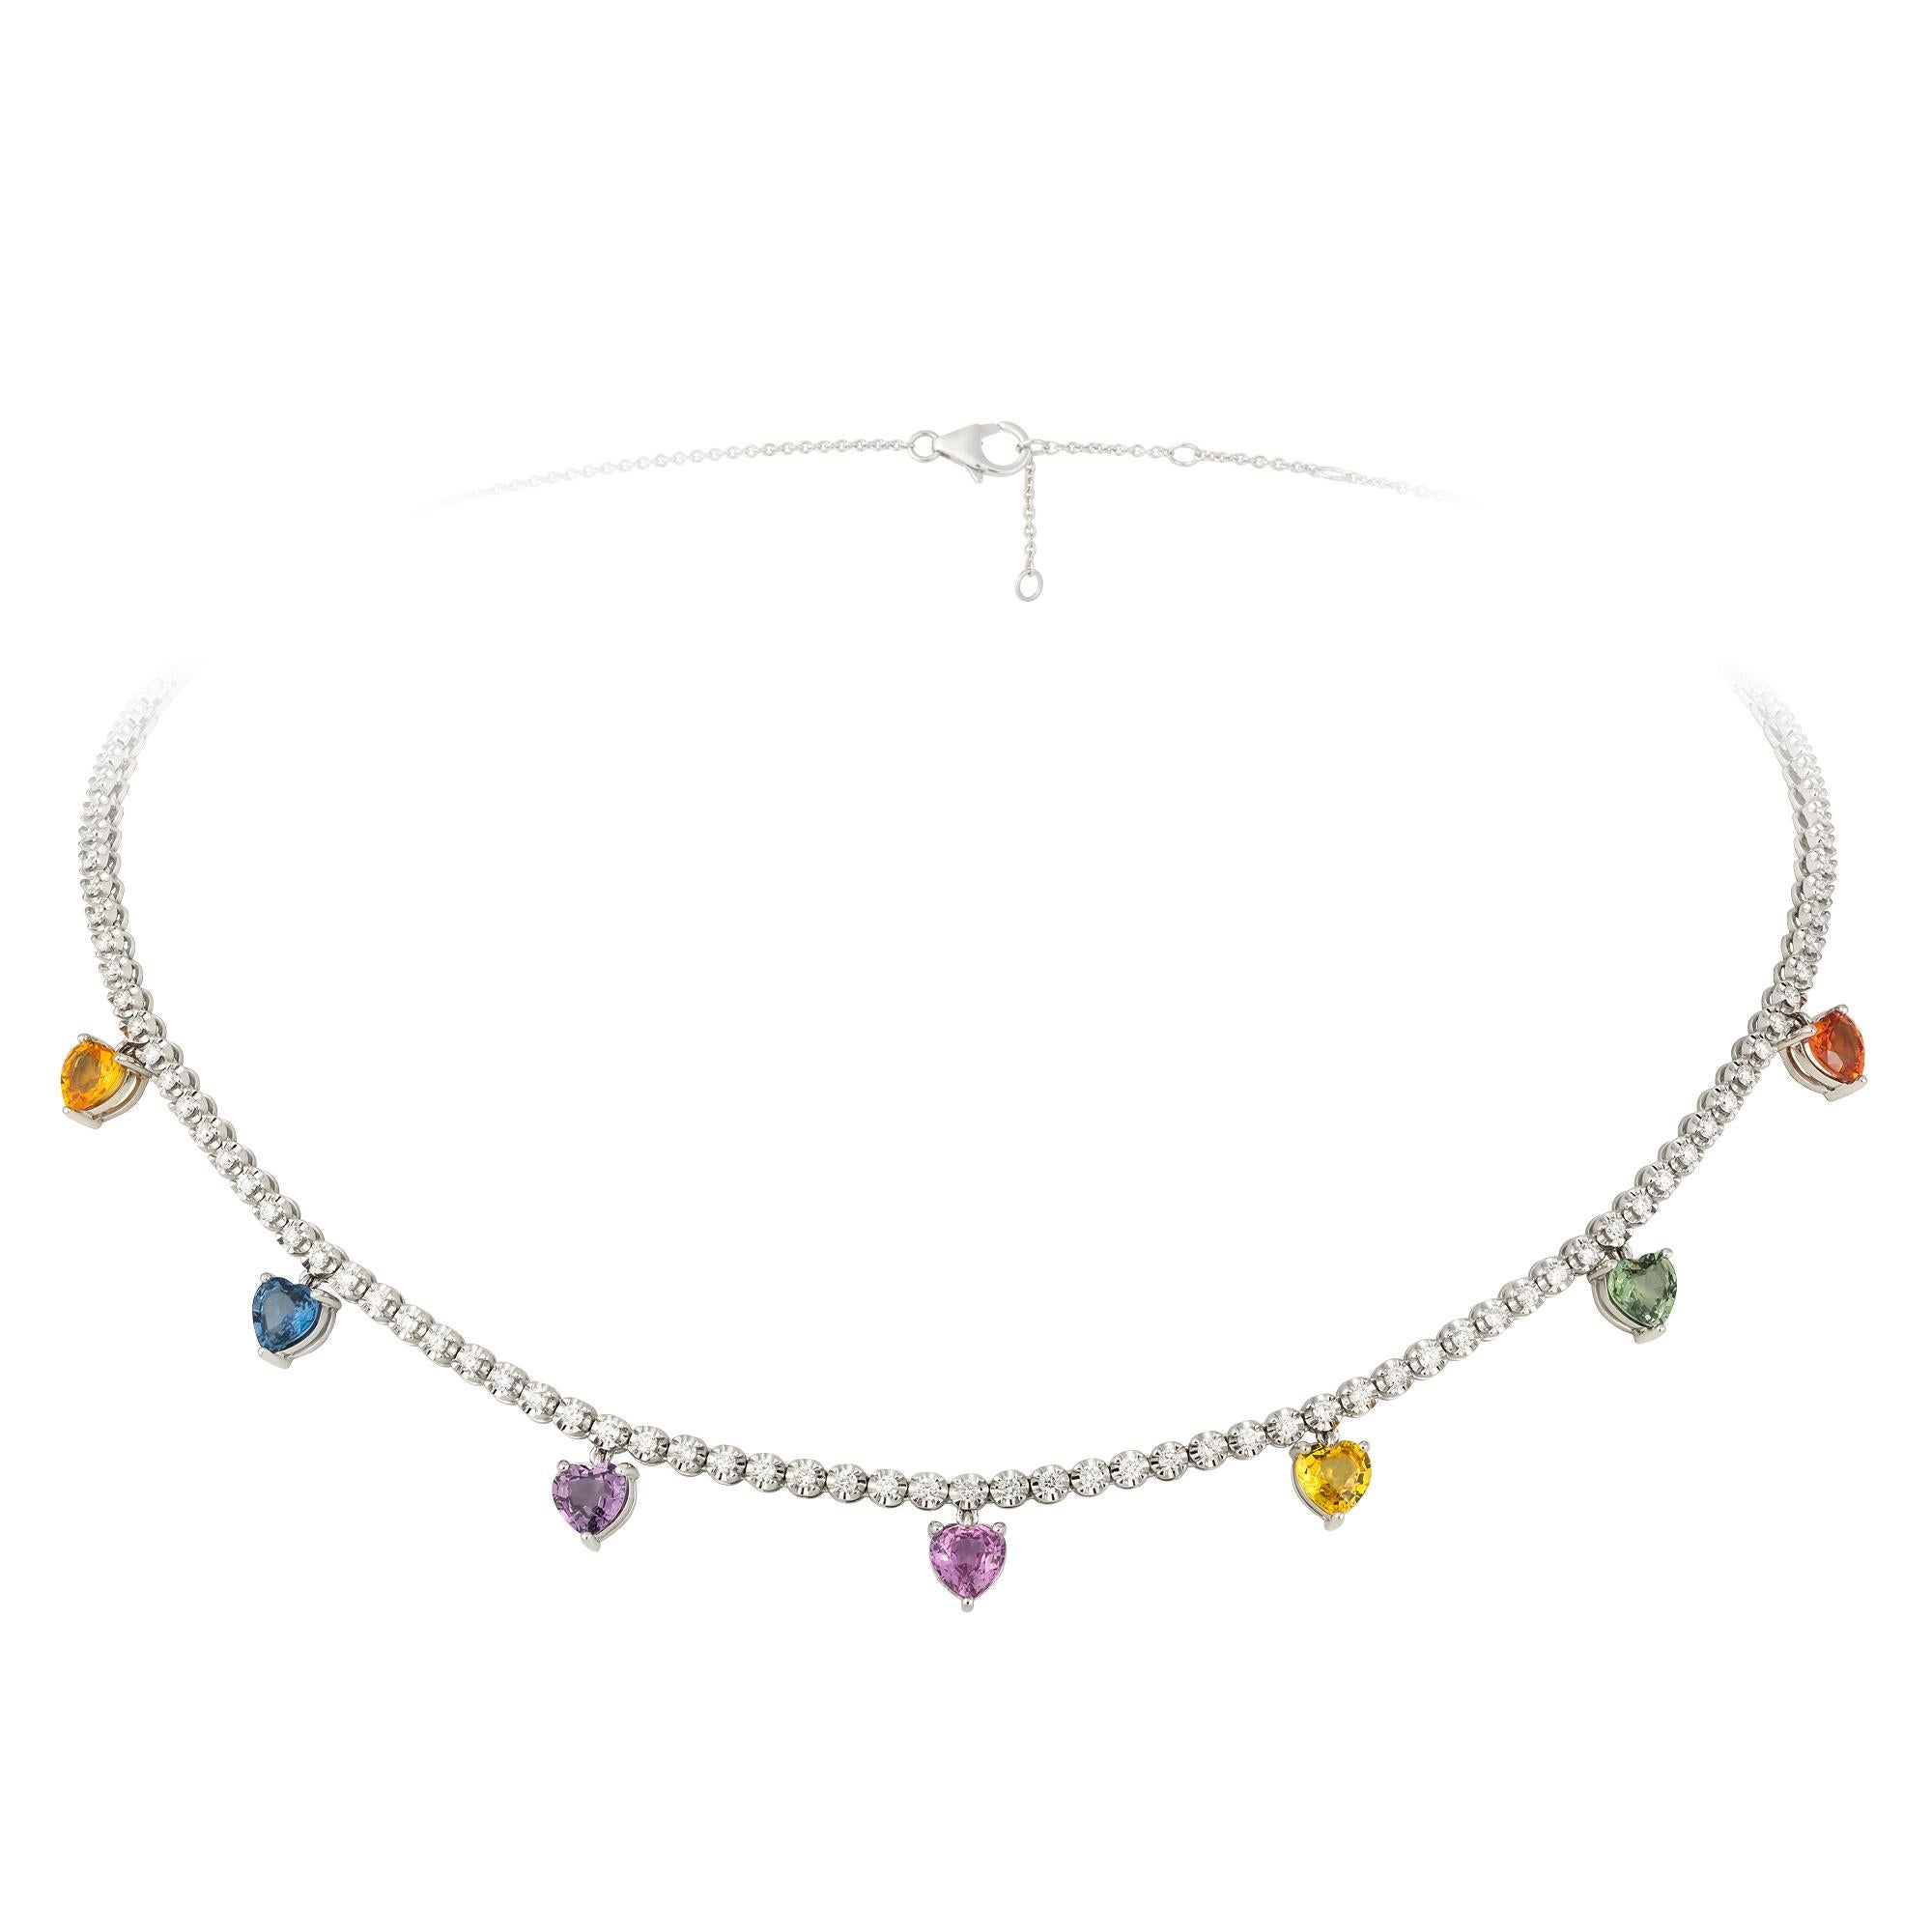 NECKLACE 18K White Gold 
Diamond 1.25 Cts/91 Pcs 
Multi Sapphire 3.65 Cts/7 Pcs

With a heritage of ancient fine Swiss jewelry traditions, NATKINA is a Geneva based jewellery brand, which creates modern jewellery masterpieces suitable for every day